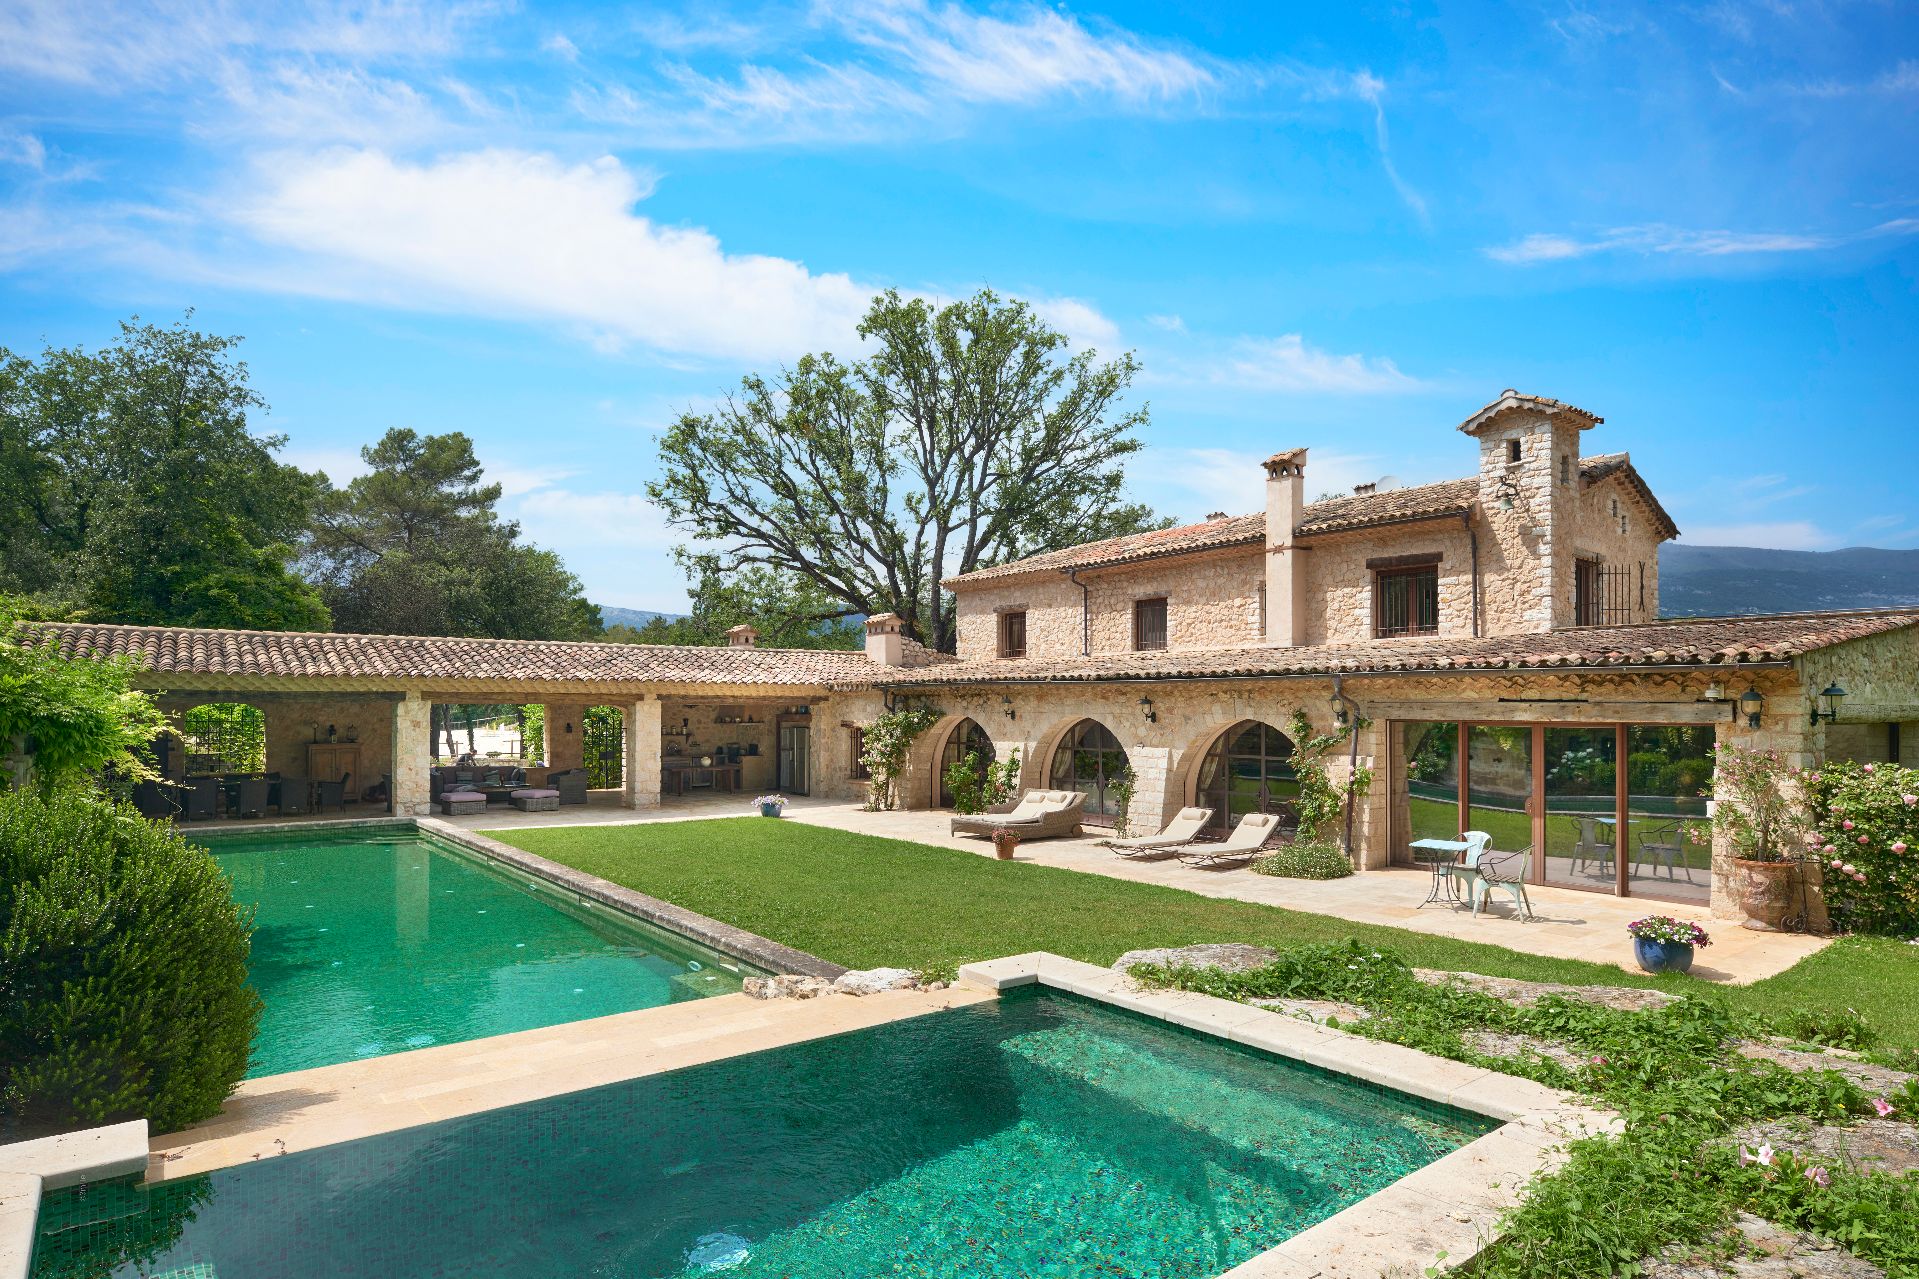 Equestrian property Roquefort-les-Pins - a 5 bedroom equestrian property for sale in Venice